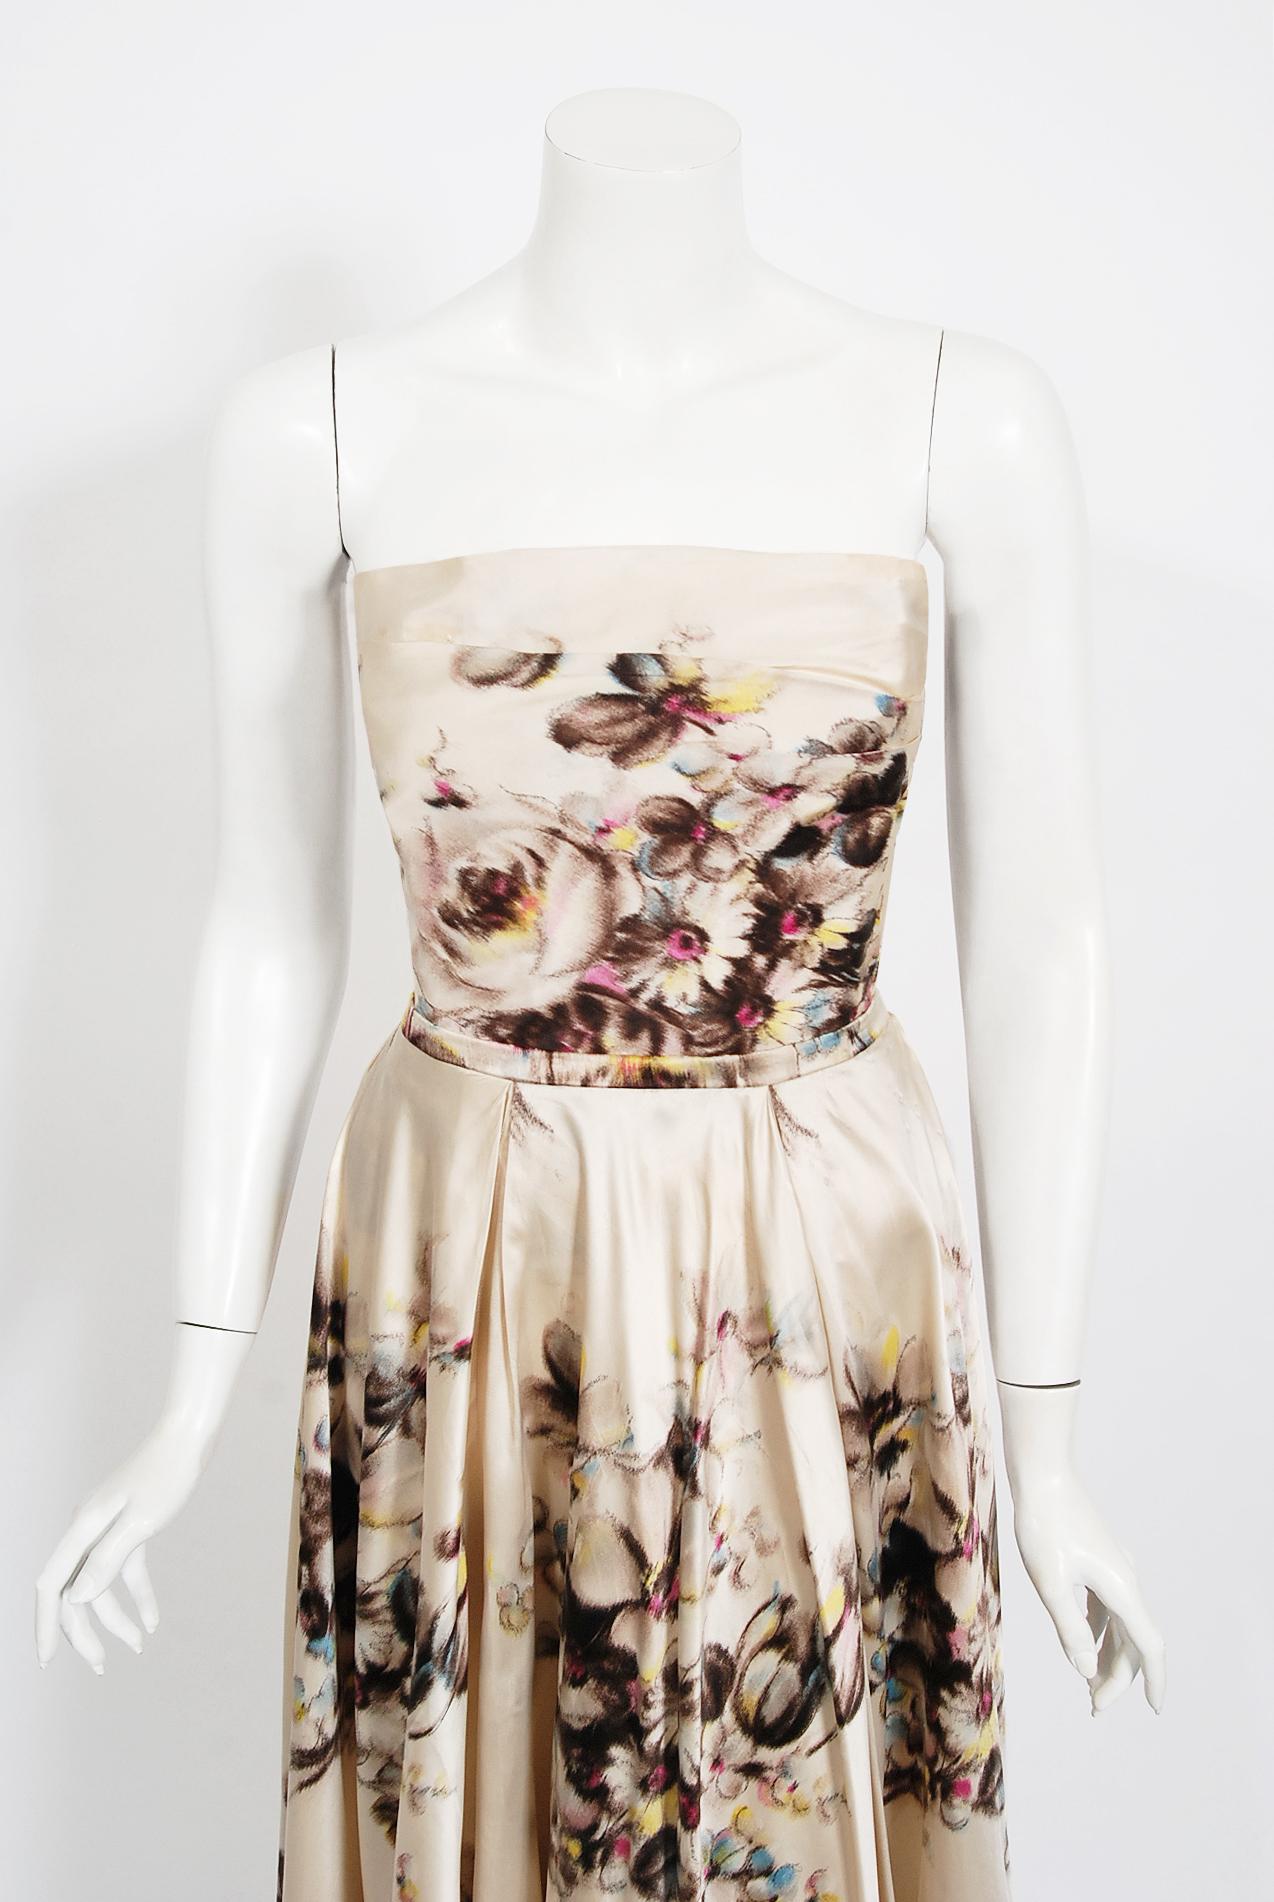 Breathtaking Jeanne Lafaurie Couture watercolor garden two-piece gown ensemble dating back to the mid 1950's era of fashion. Jeanne Lafaurie was a Paris couturier, designing from 1925 until 1958, whose house was known for spectacular fabrics and